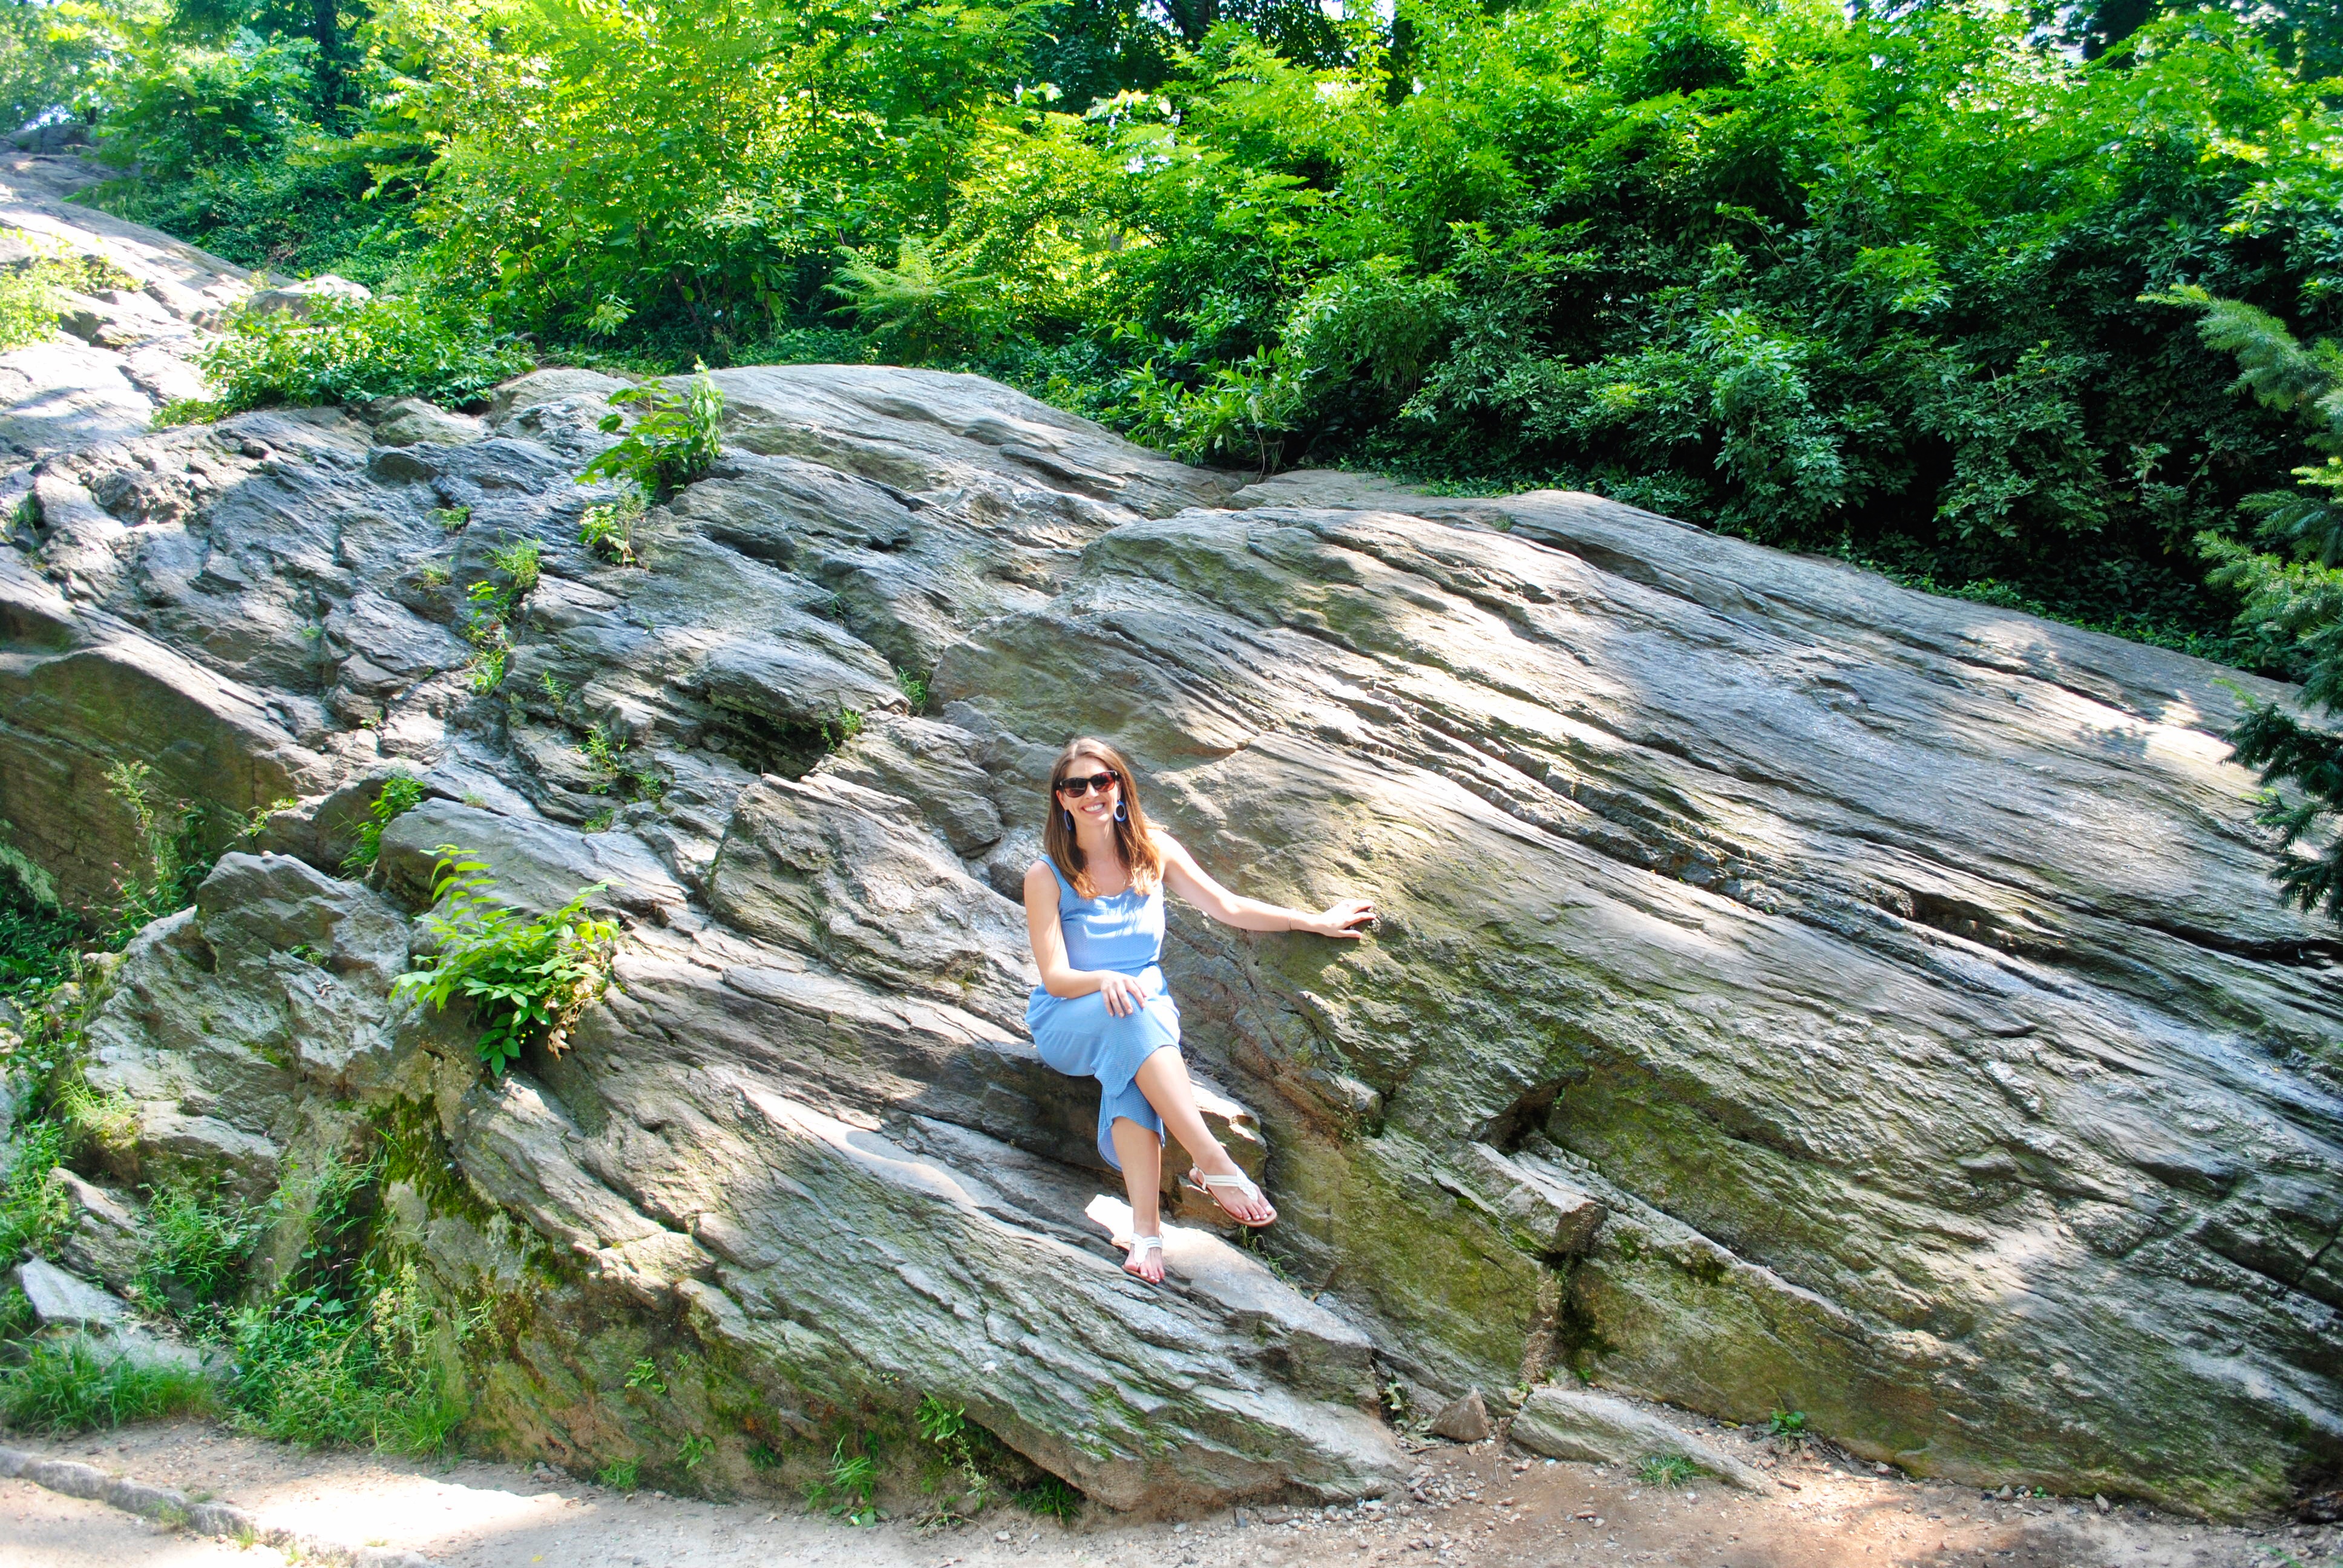 NYC Bucket List: Take a rest in Central Park